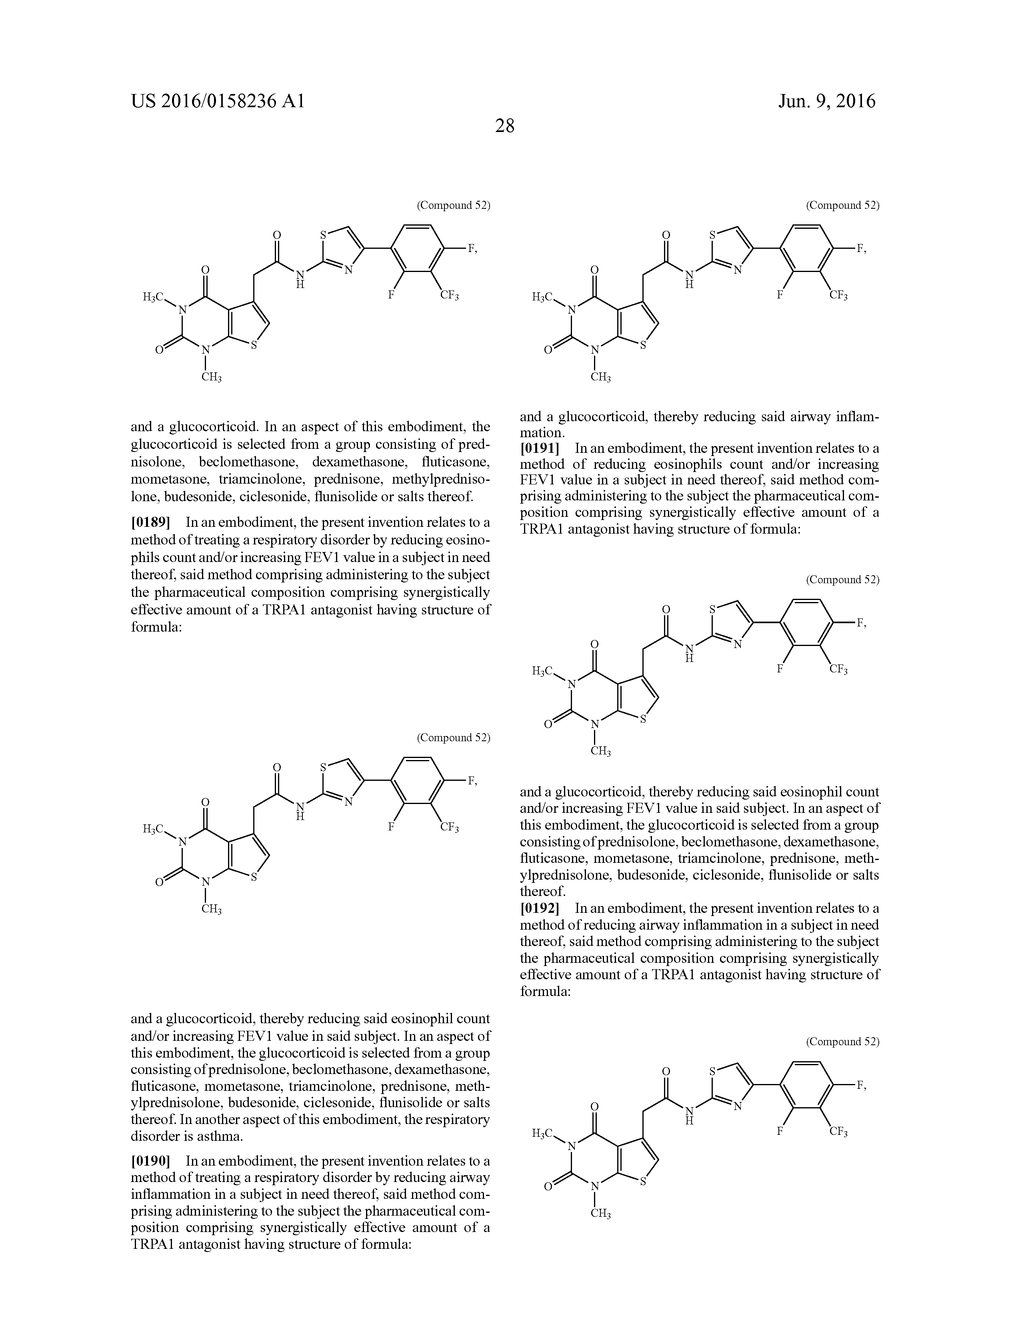 PHARMACEUTICAL COMPOSITION COMPRISING A TRPA1 ANTAGONIST AND A STEROID - diagram, schematic, and image 35